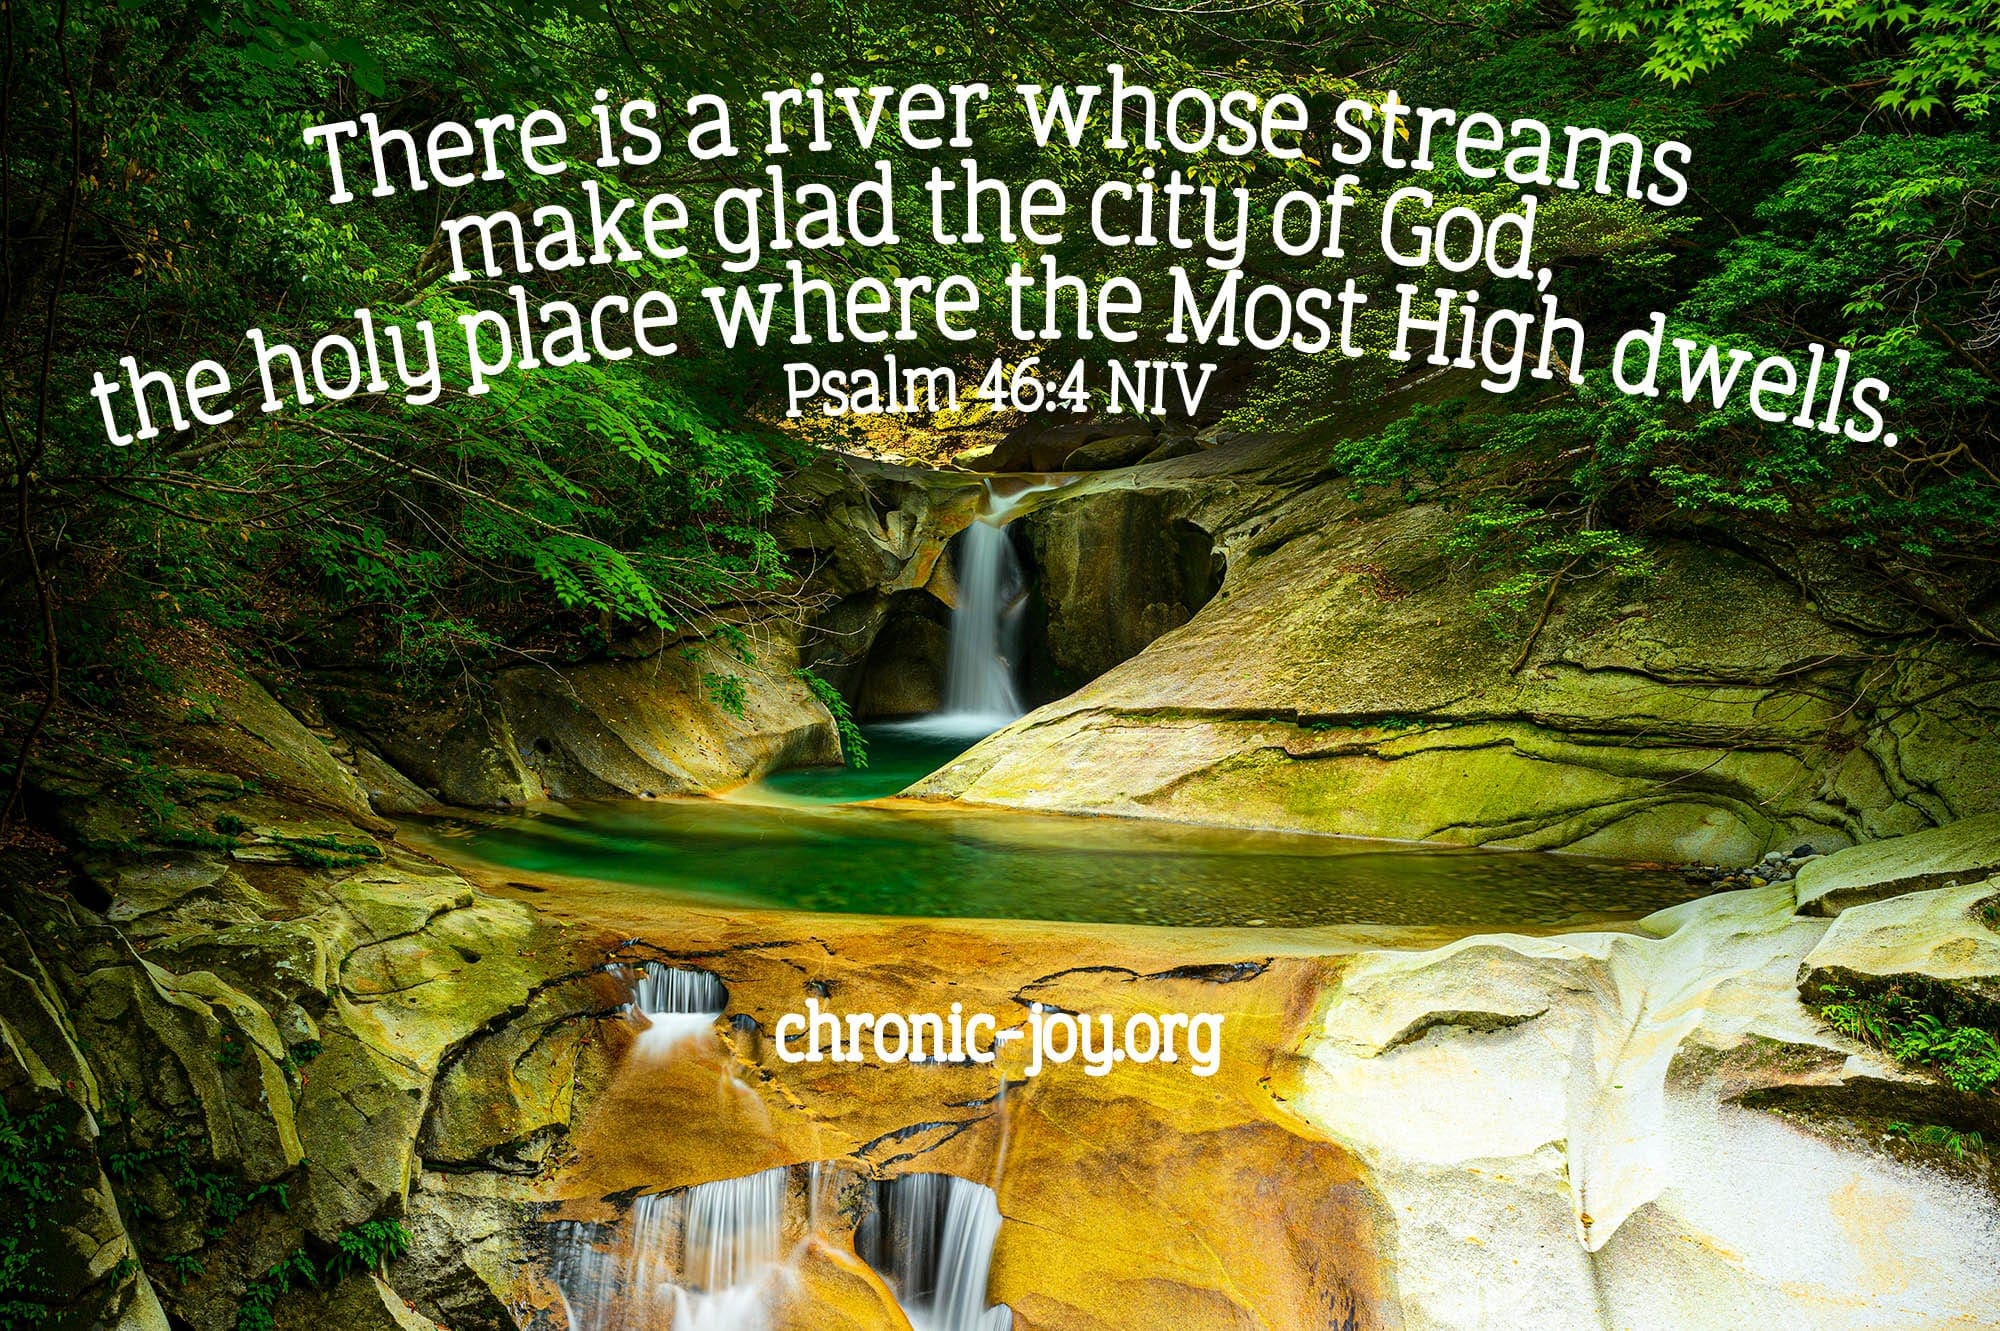 "There is a river whose streams make glad the city of God, the holy place where the Most High dwells." Psalm 46:4 NIV